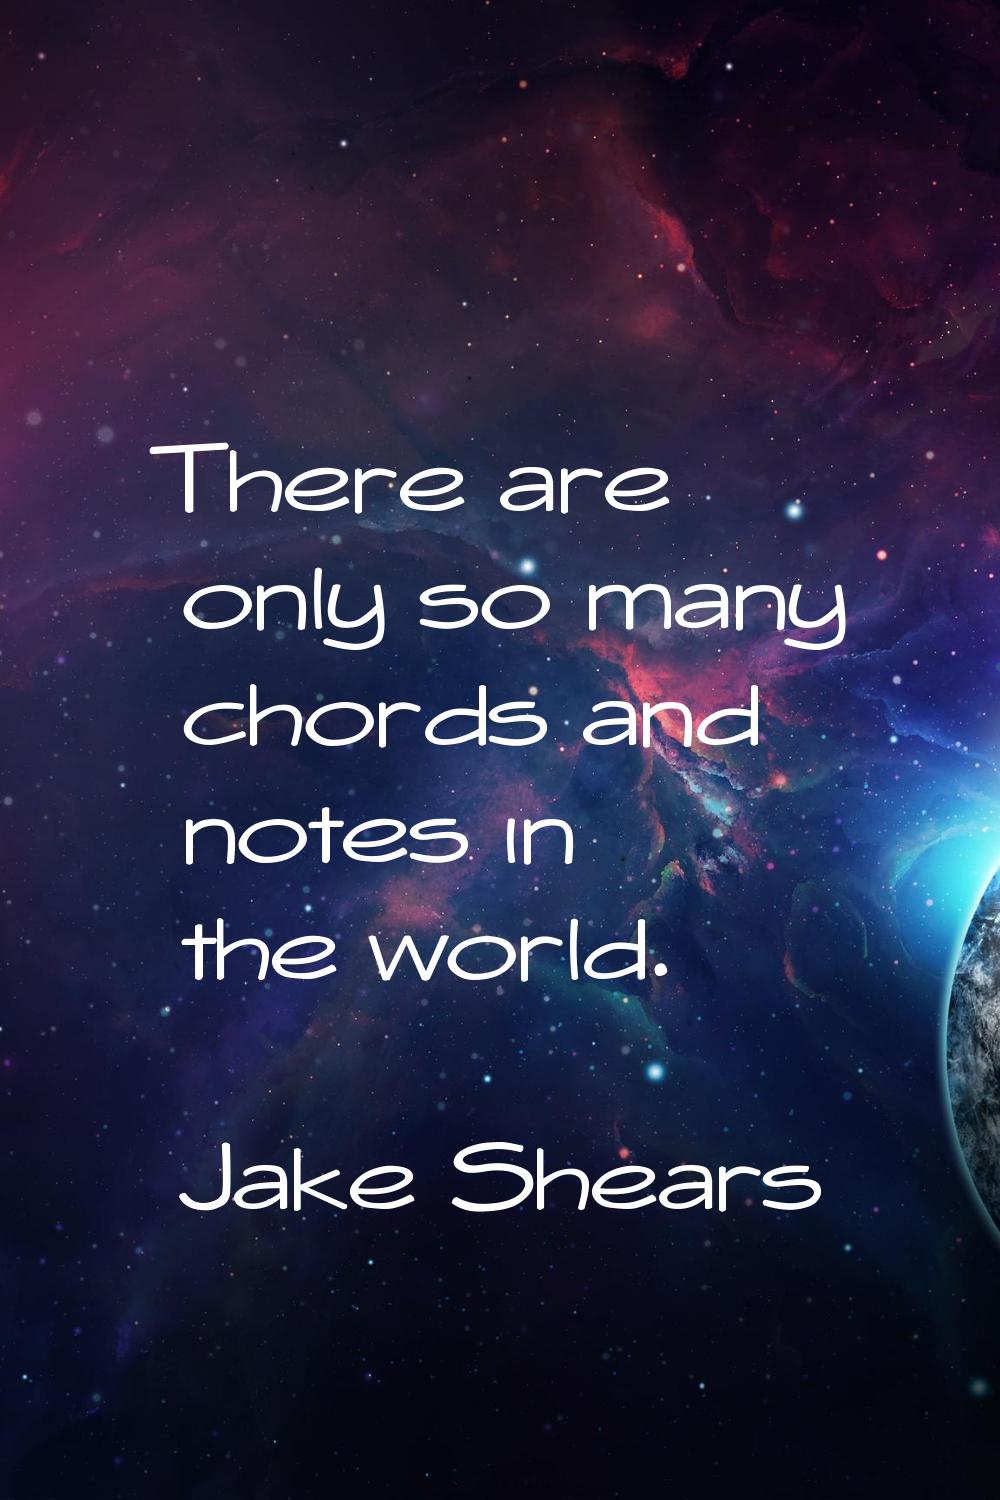 There are only so many chords and notes in the world.